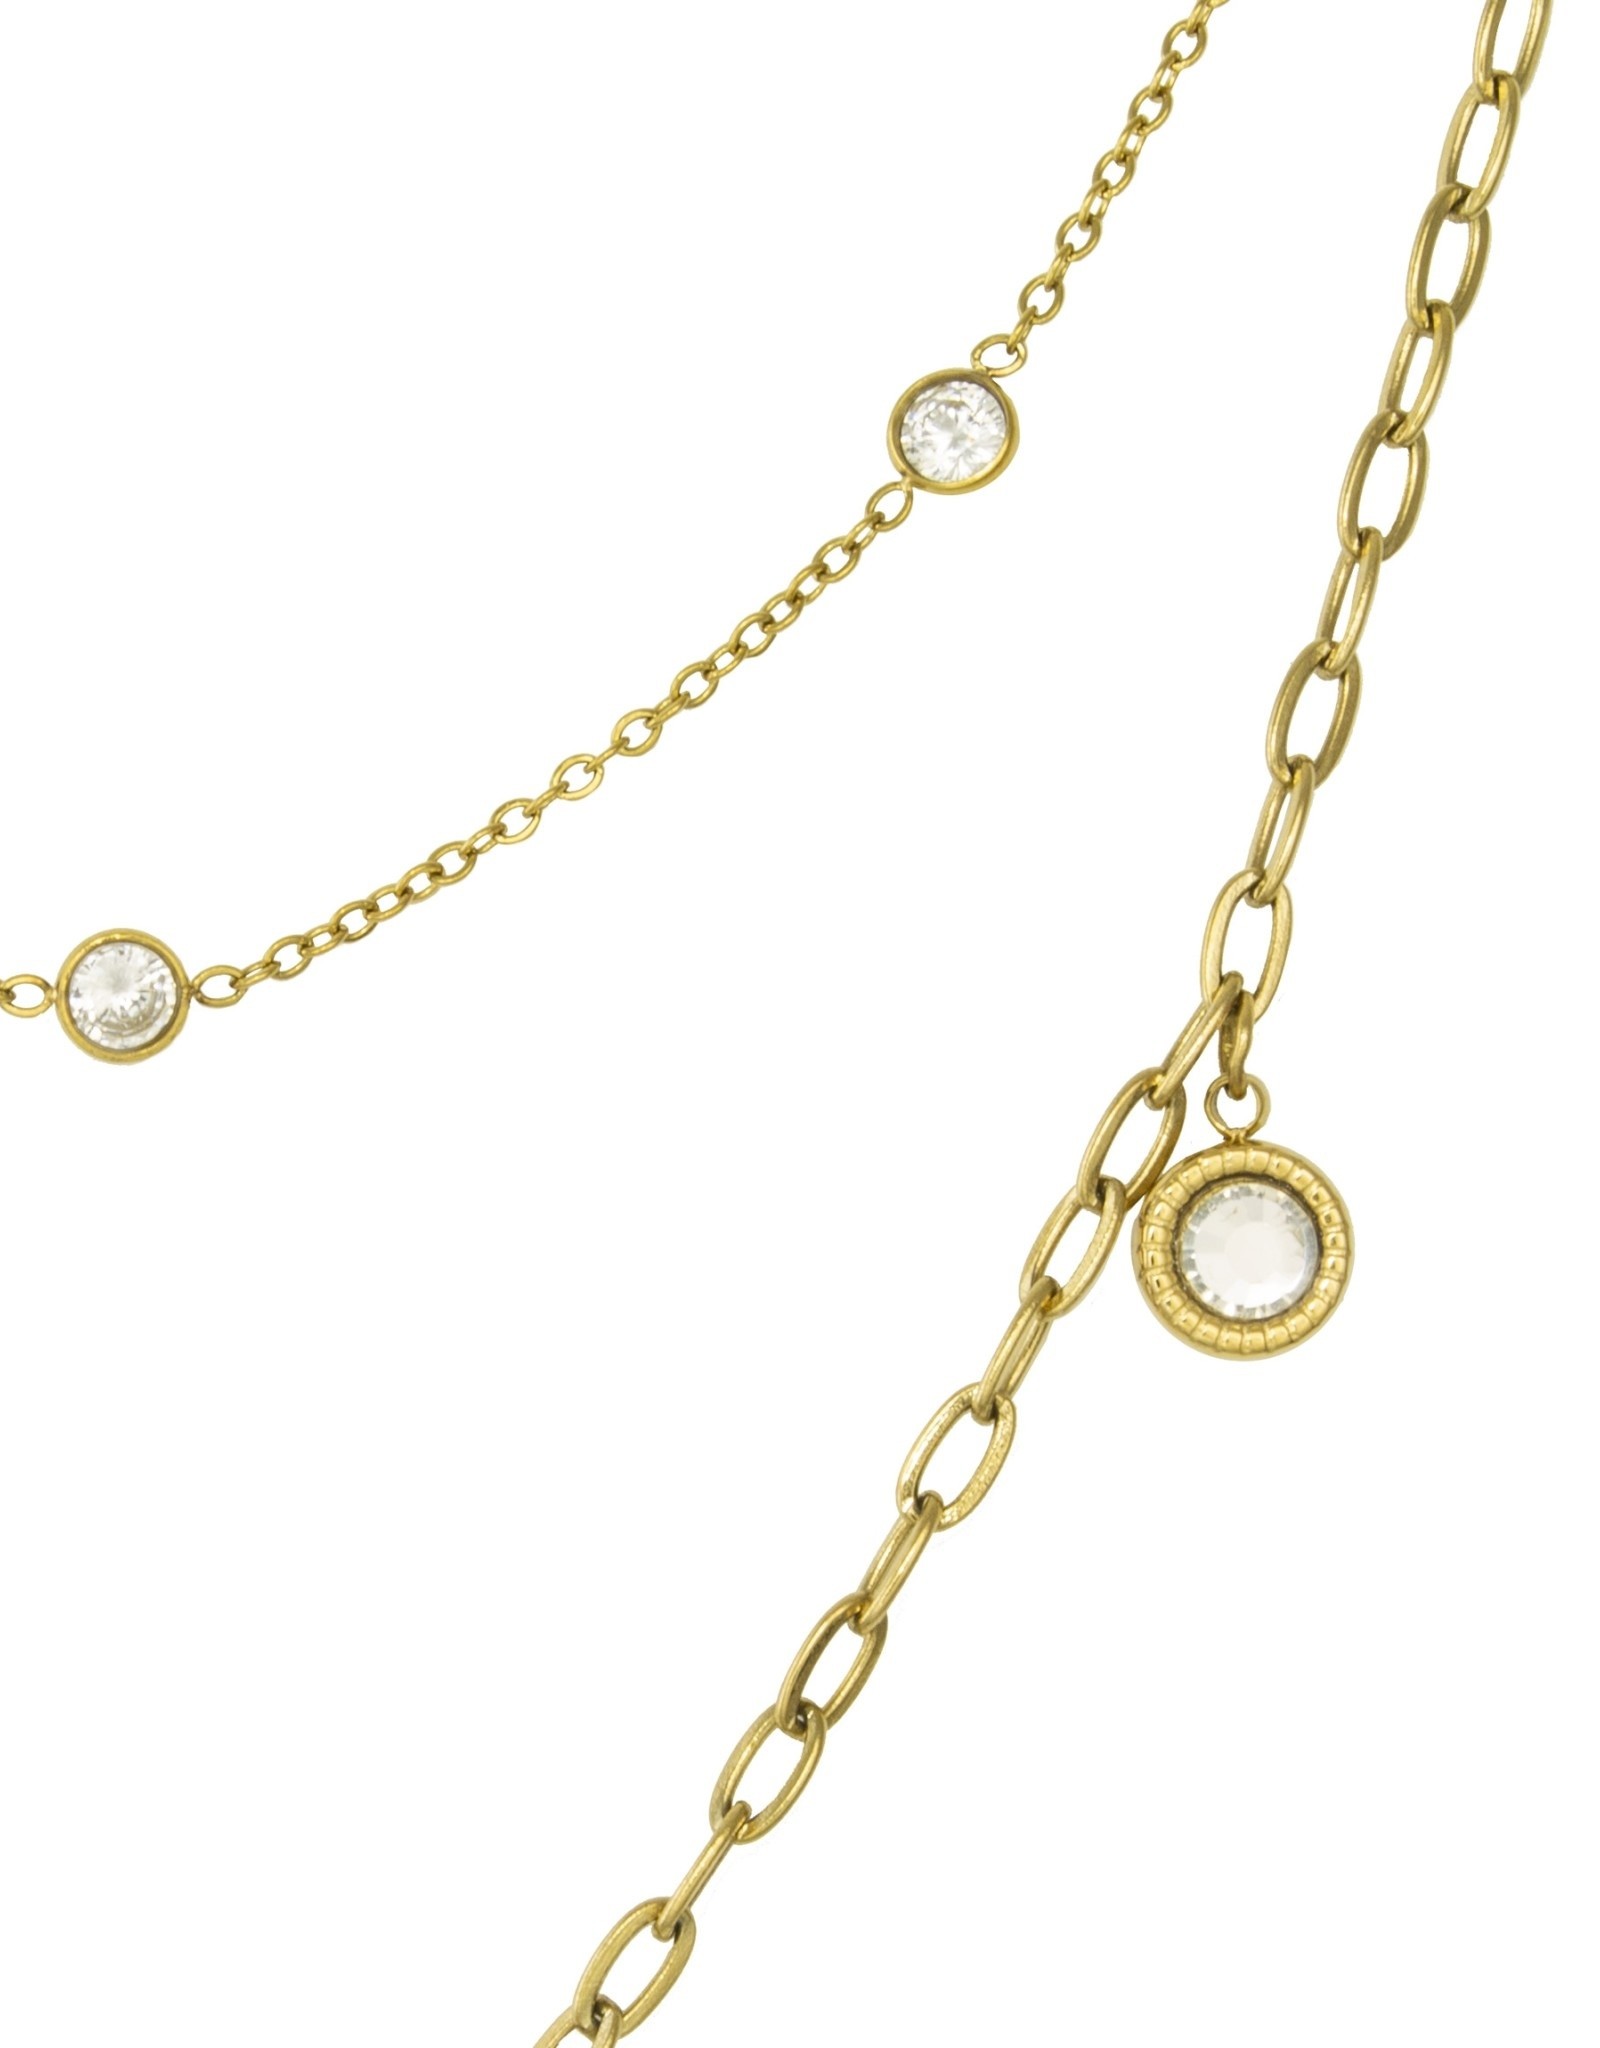 Jackie J Stainless steel, double layer gold necklace with cobalt & CZ charms